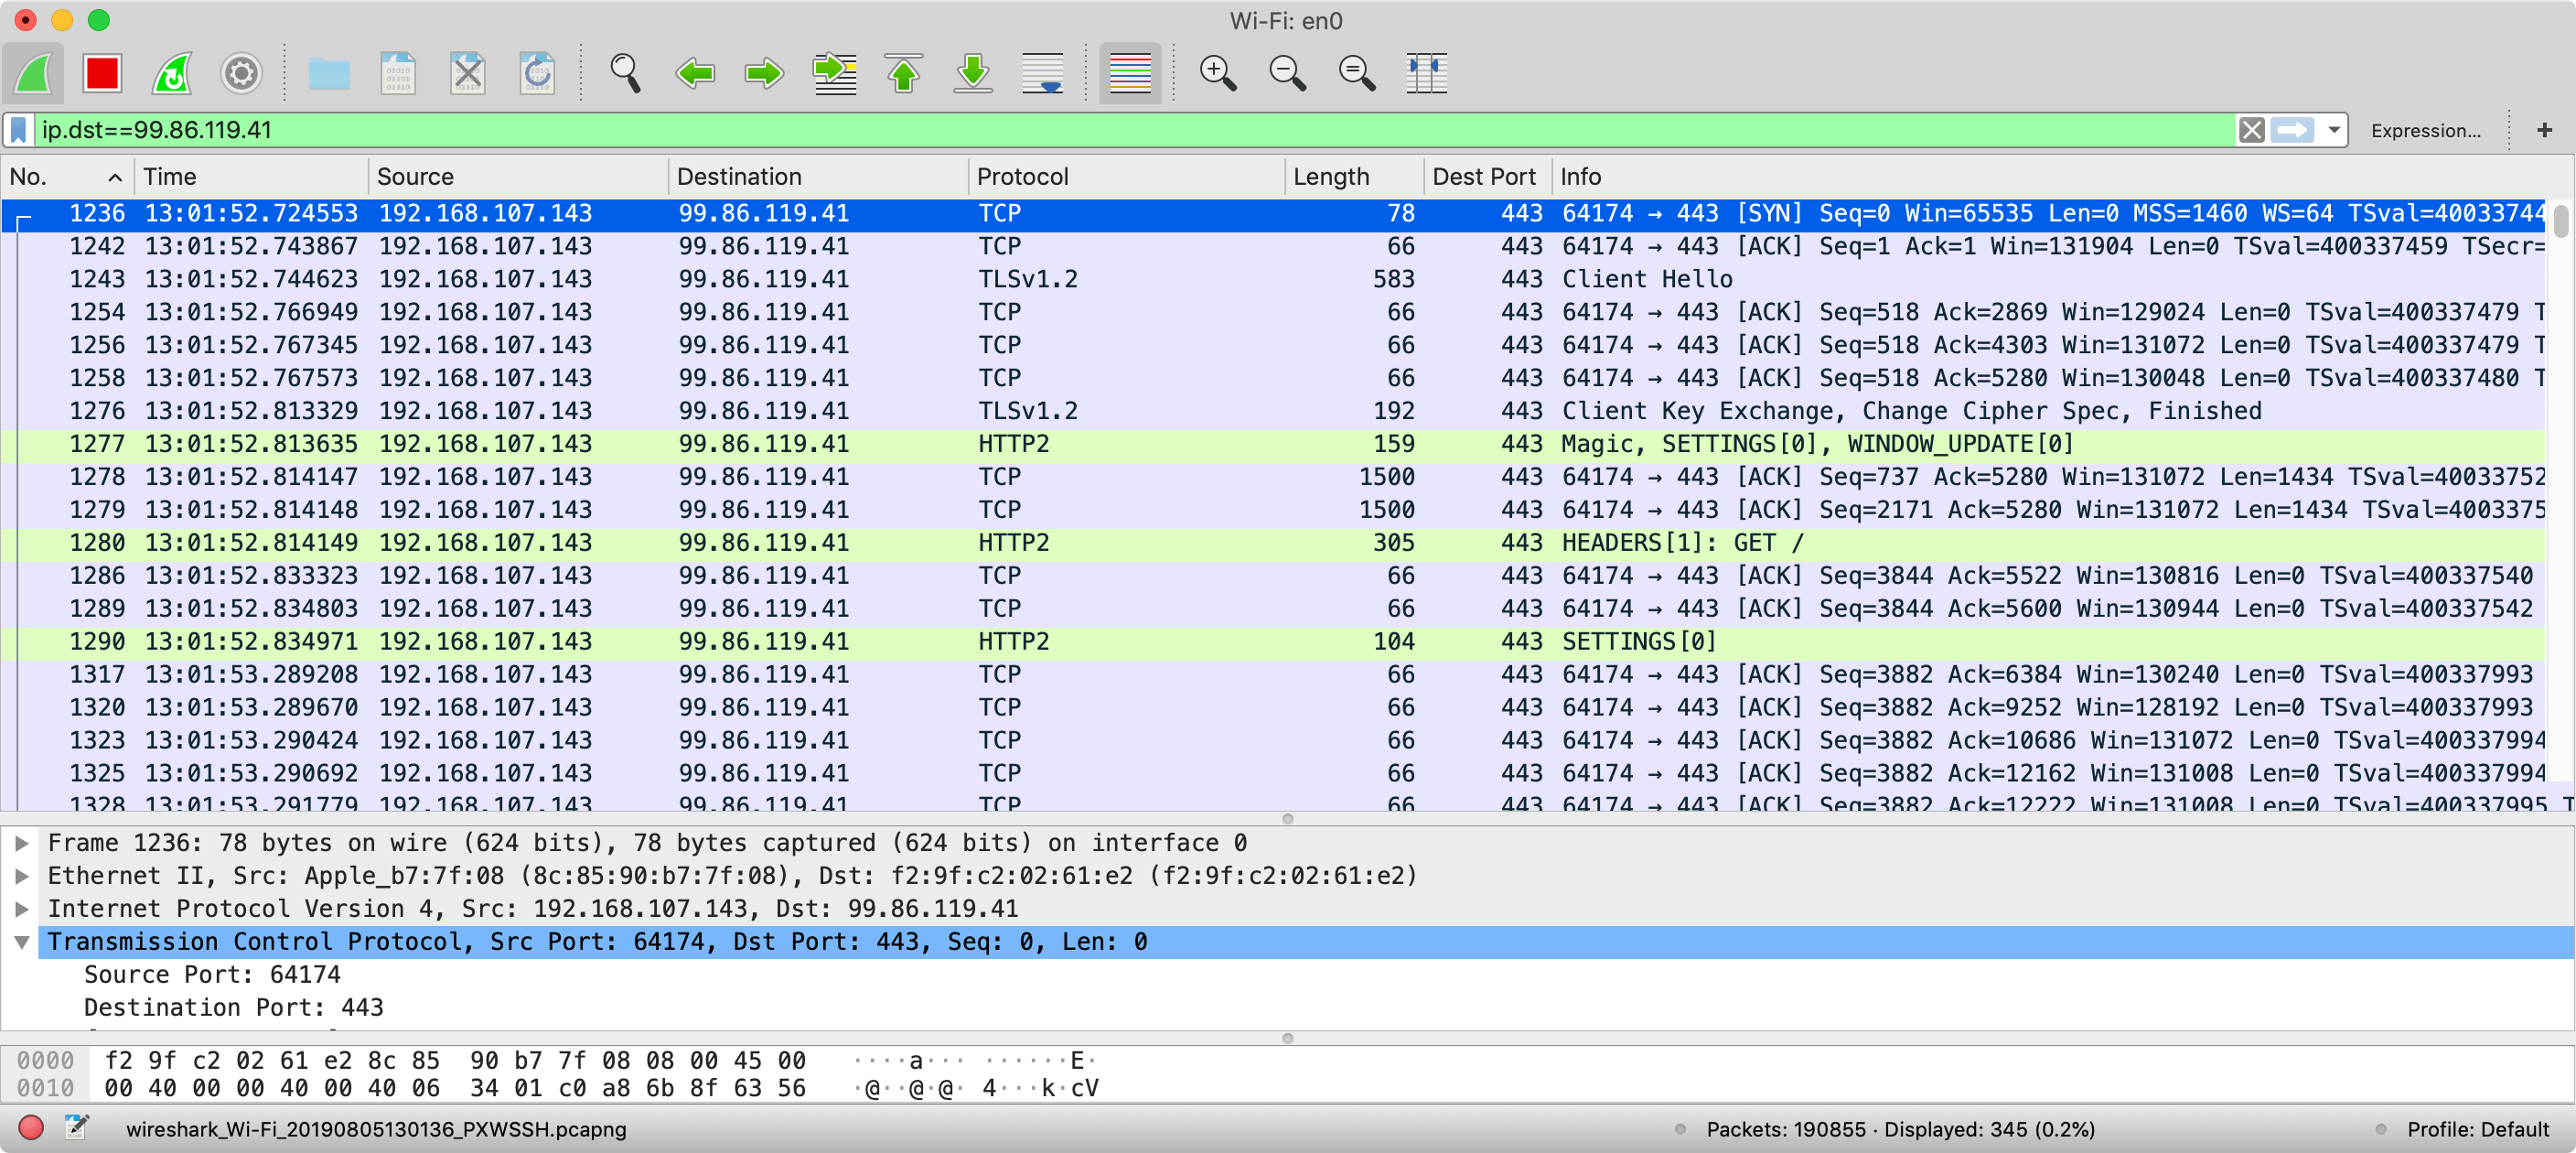 Viewing download of Amazon Homepage in Wireshark from client perspective